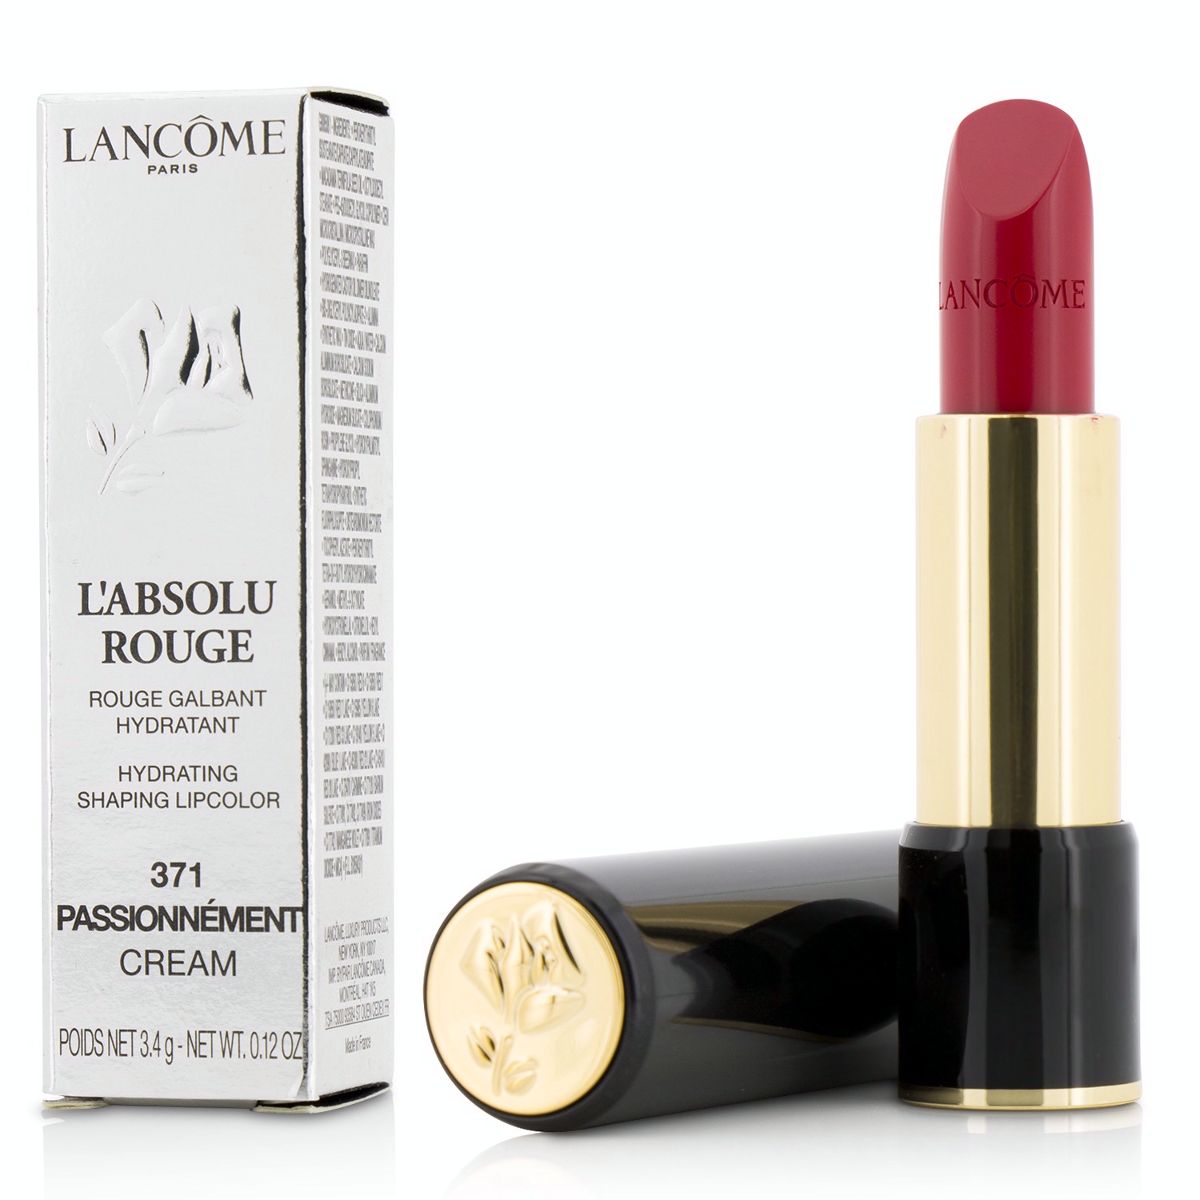 L Absolu Rouge Hydrating Shaping Lipcolor - # 371 Passionnement (Cream) Lancome Image